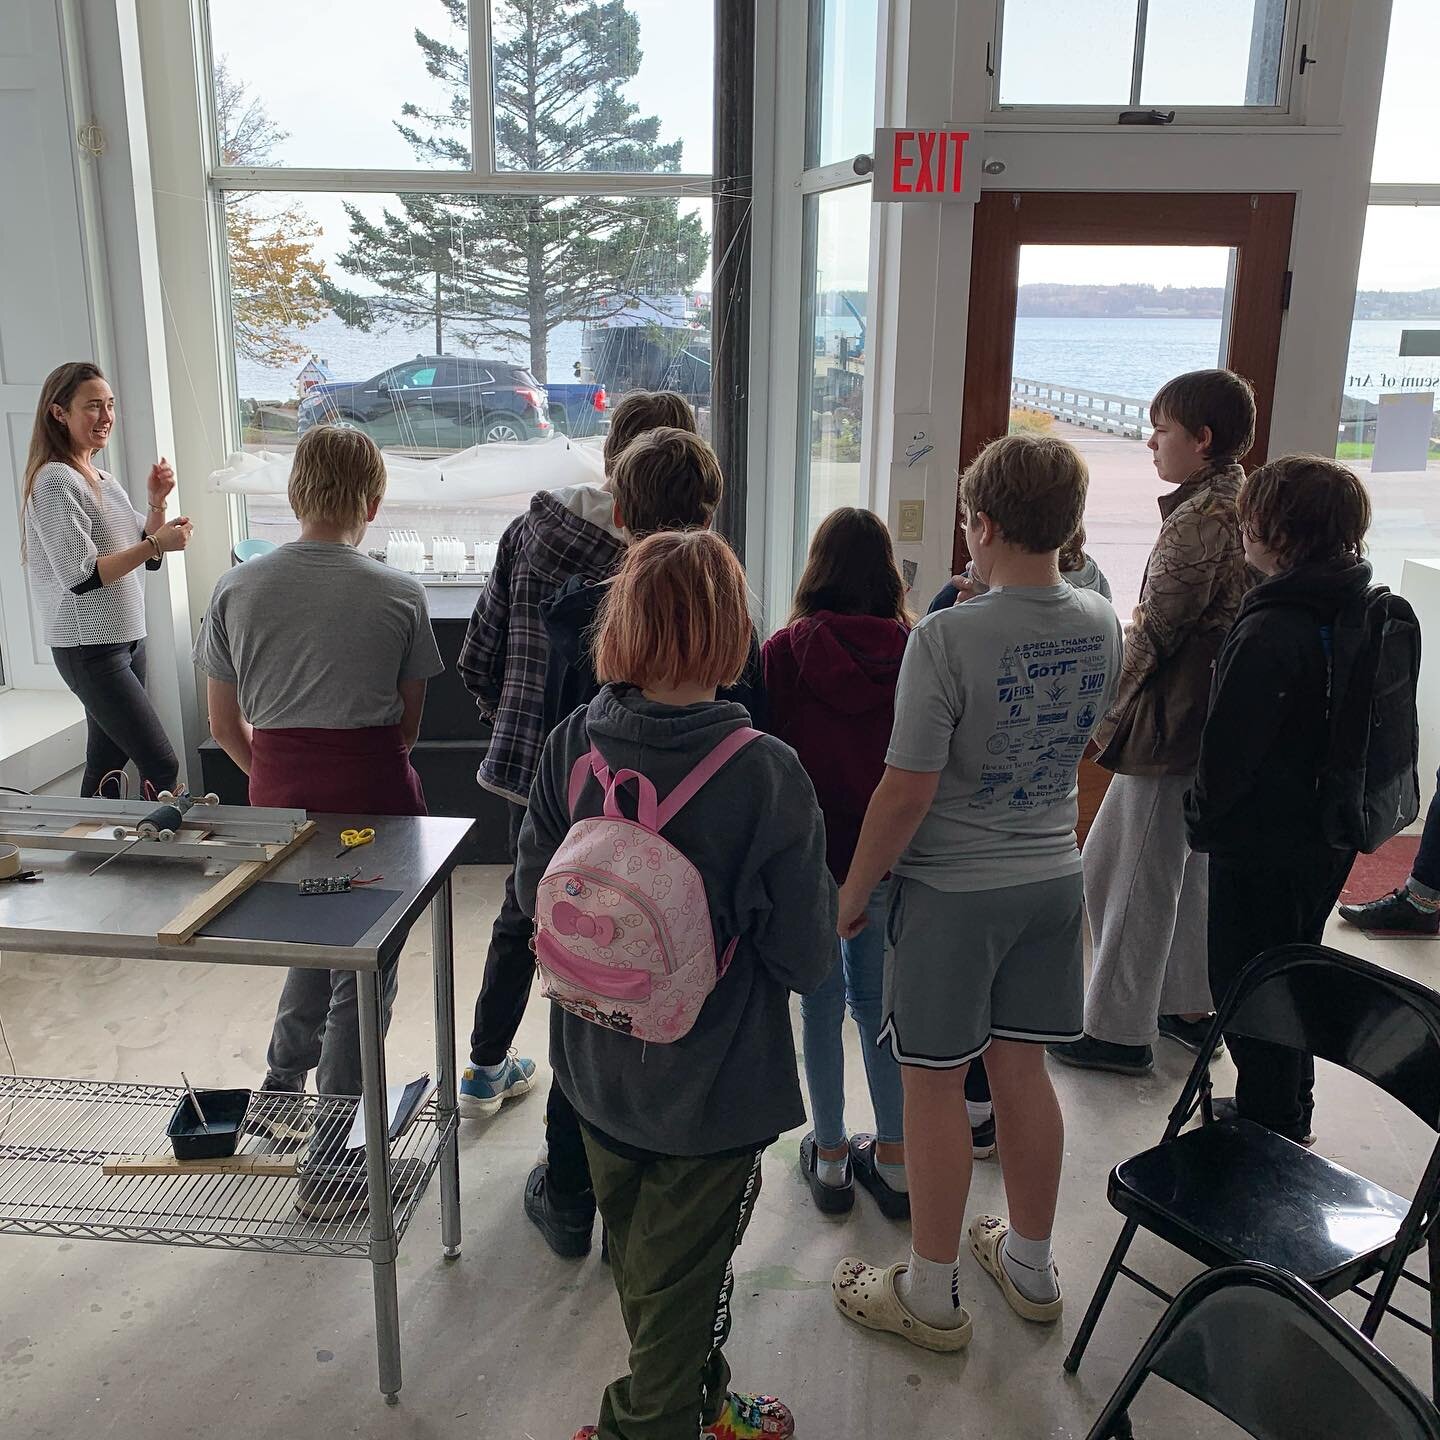 as part of my residency @tidesinstitute I hosted a workshop for Eastport Highschool that introduced computational art and data visualisation. The event involved a participatory aspect where students used a depth sensor to measure the water levels tha